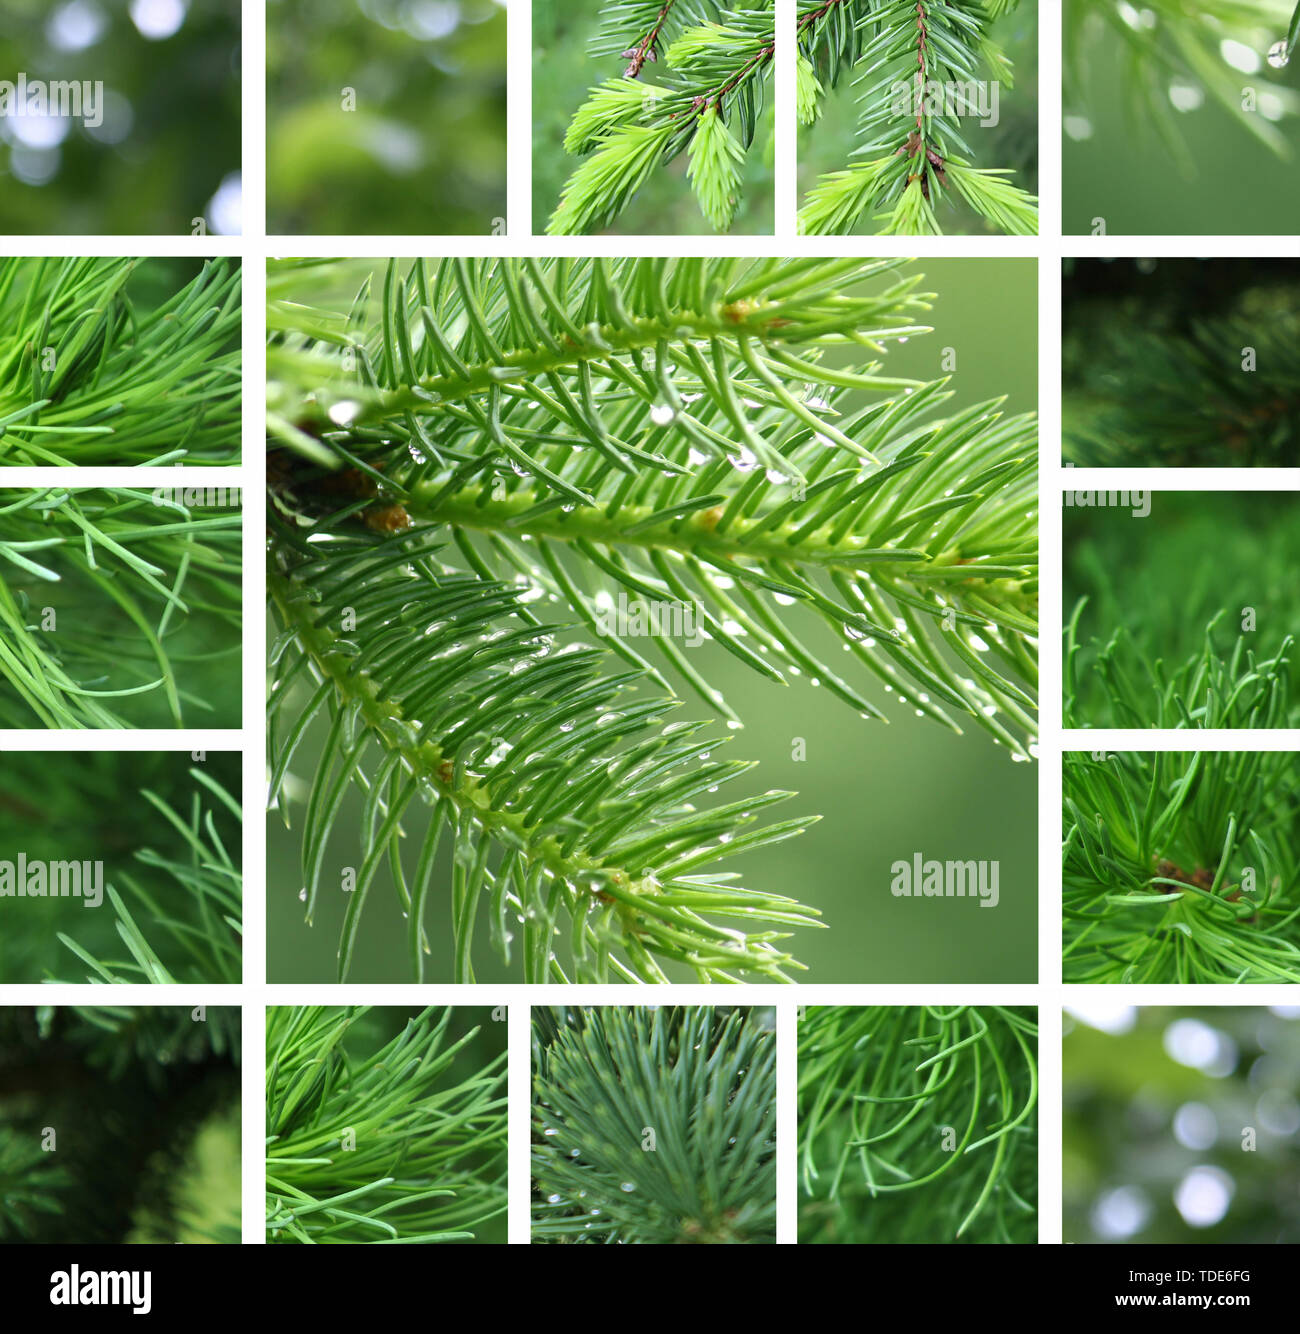 Collage of green coniferous tree with rain droplets Stock Photo